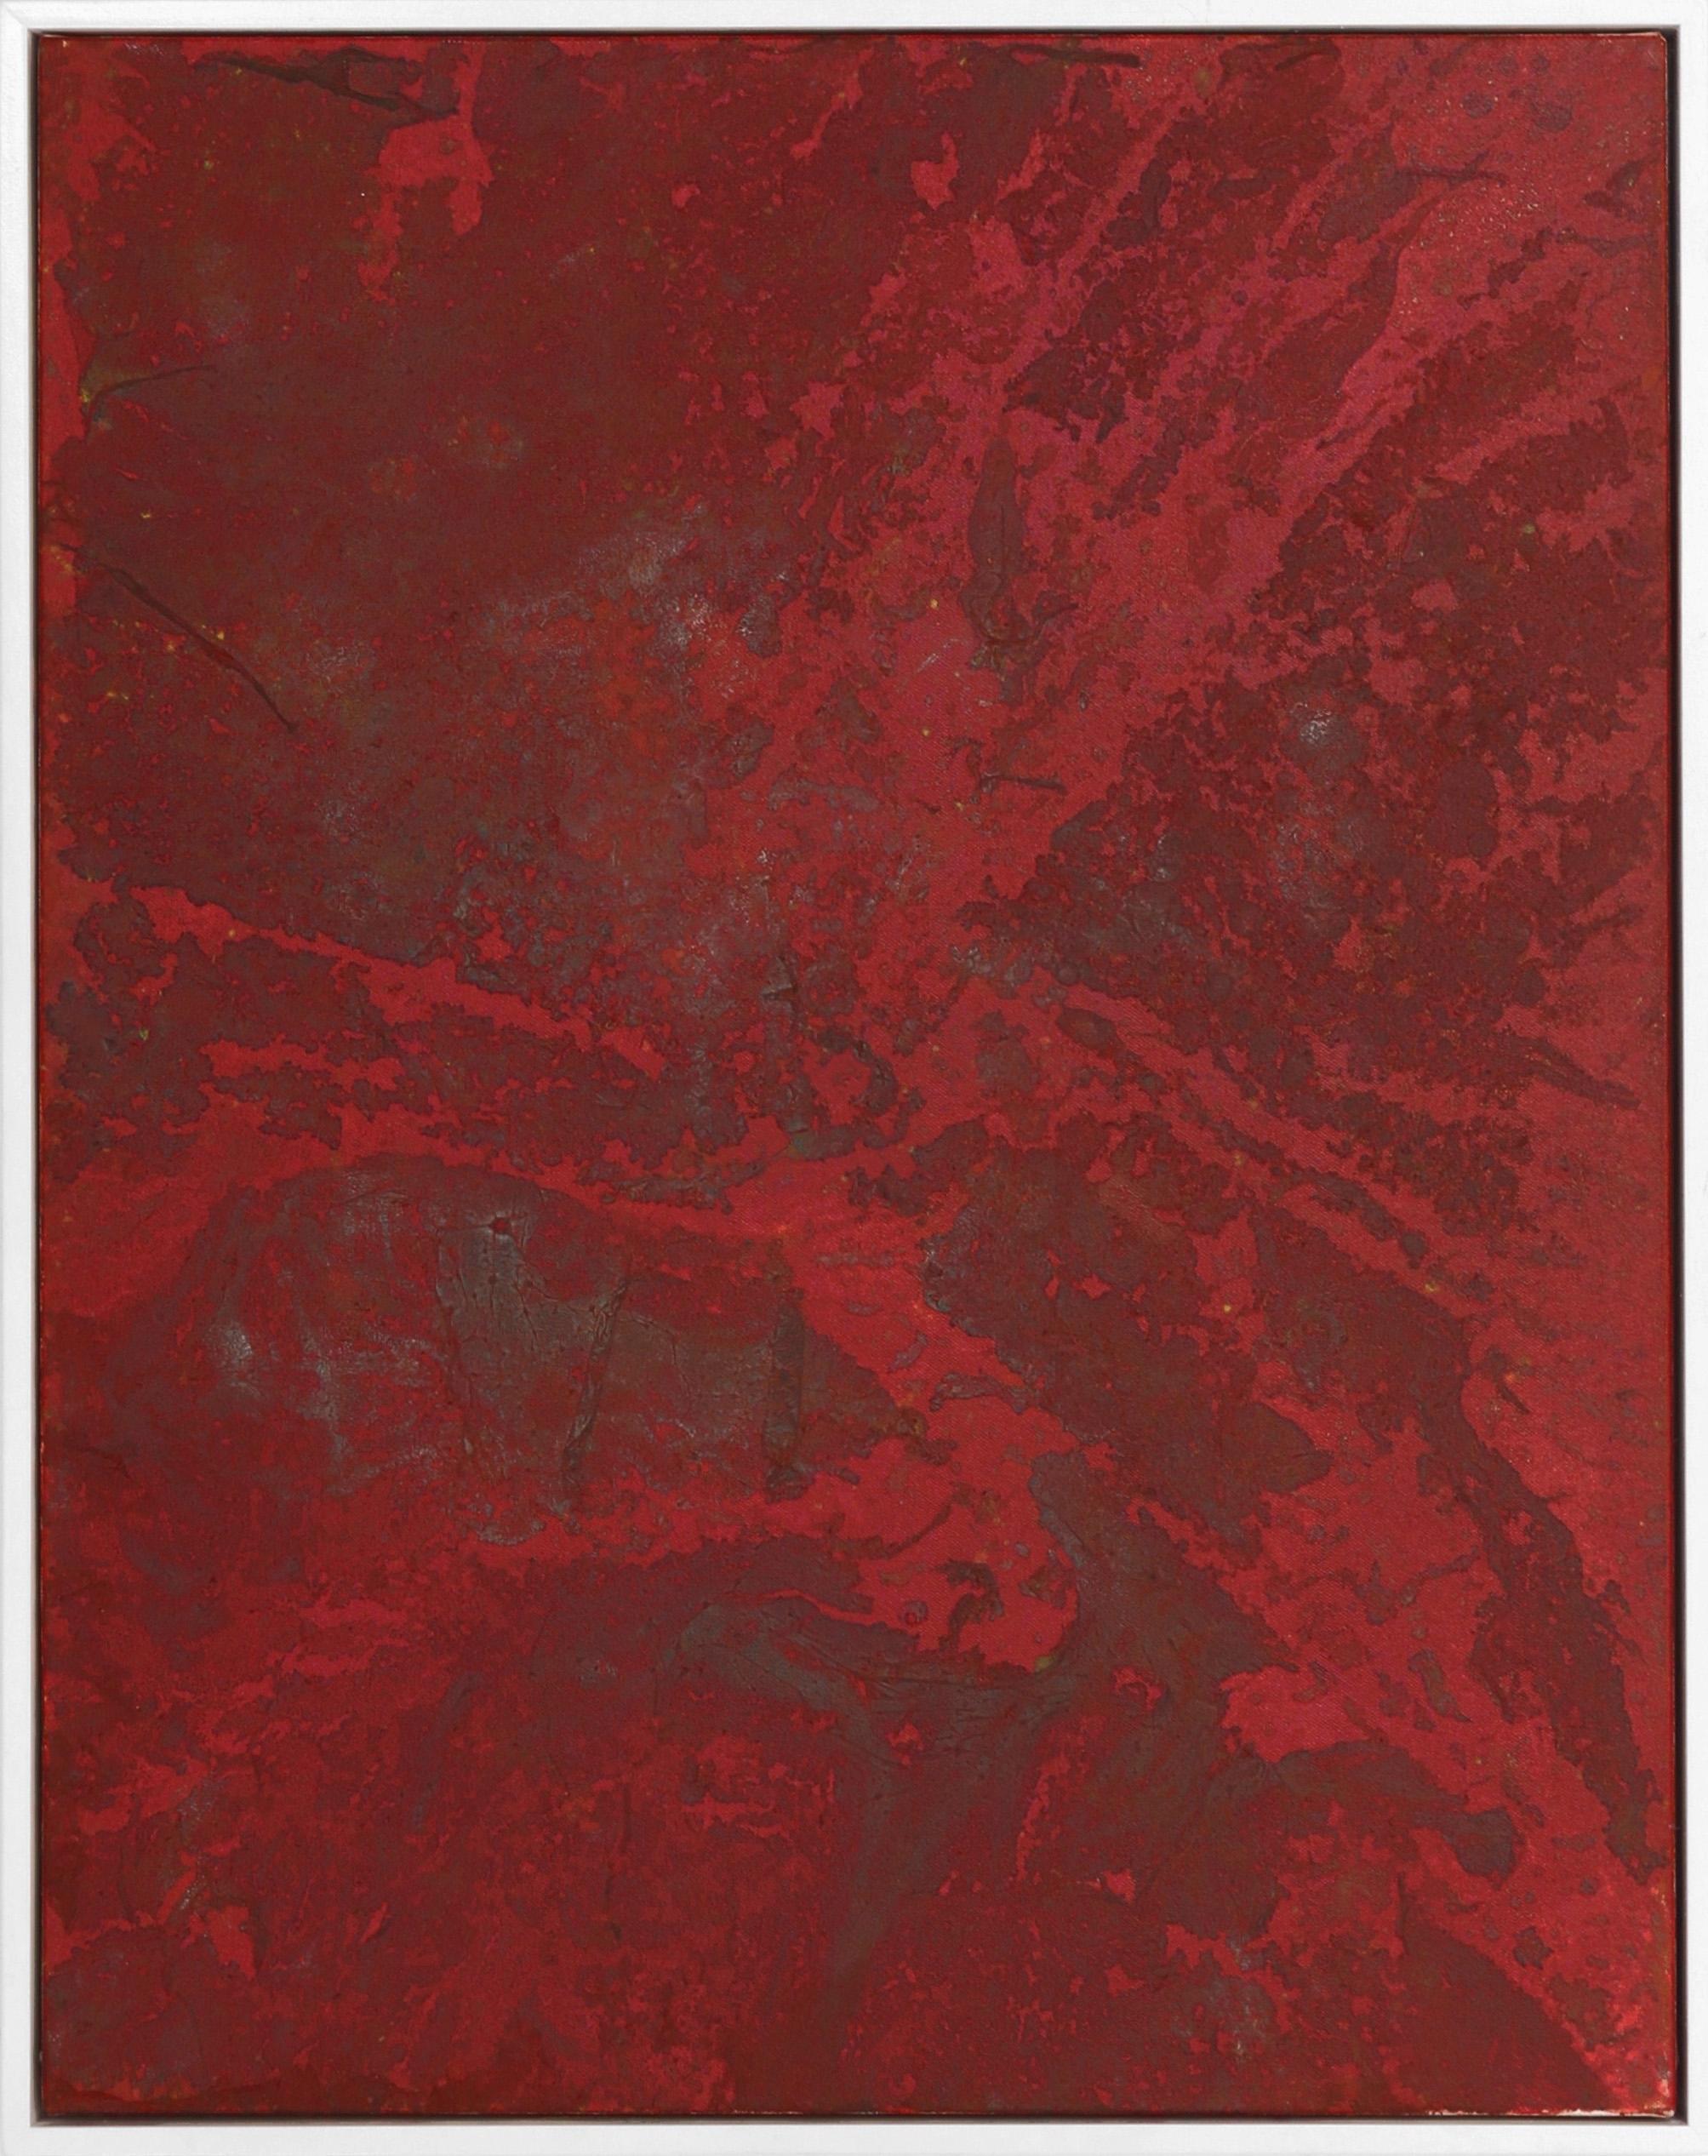 A312 - Minimalist Abstract Contemporary Original Red Textural Artwork - Mixed Media Art by Marco Schmidli